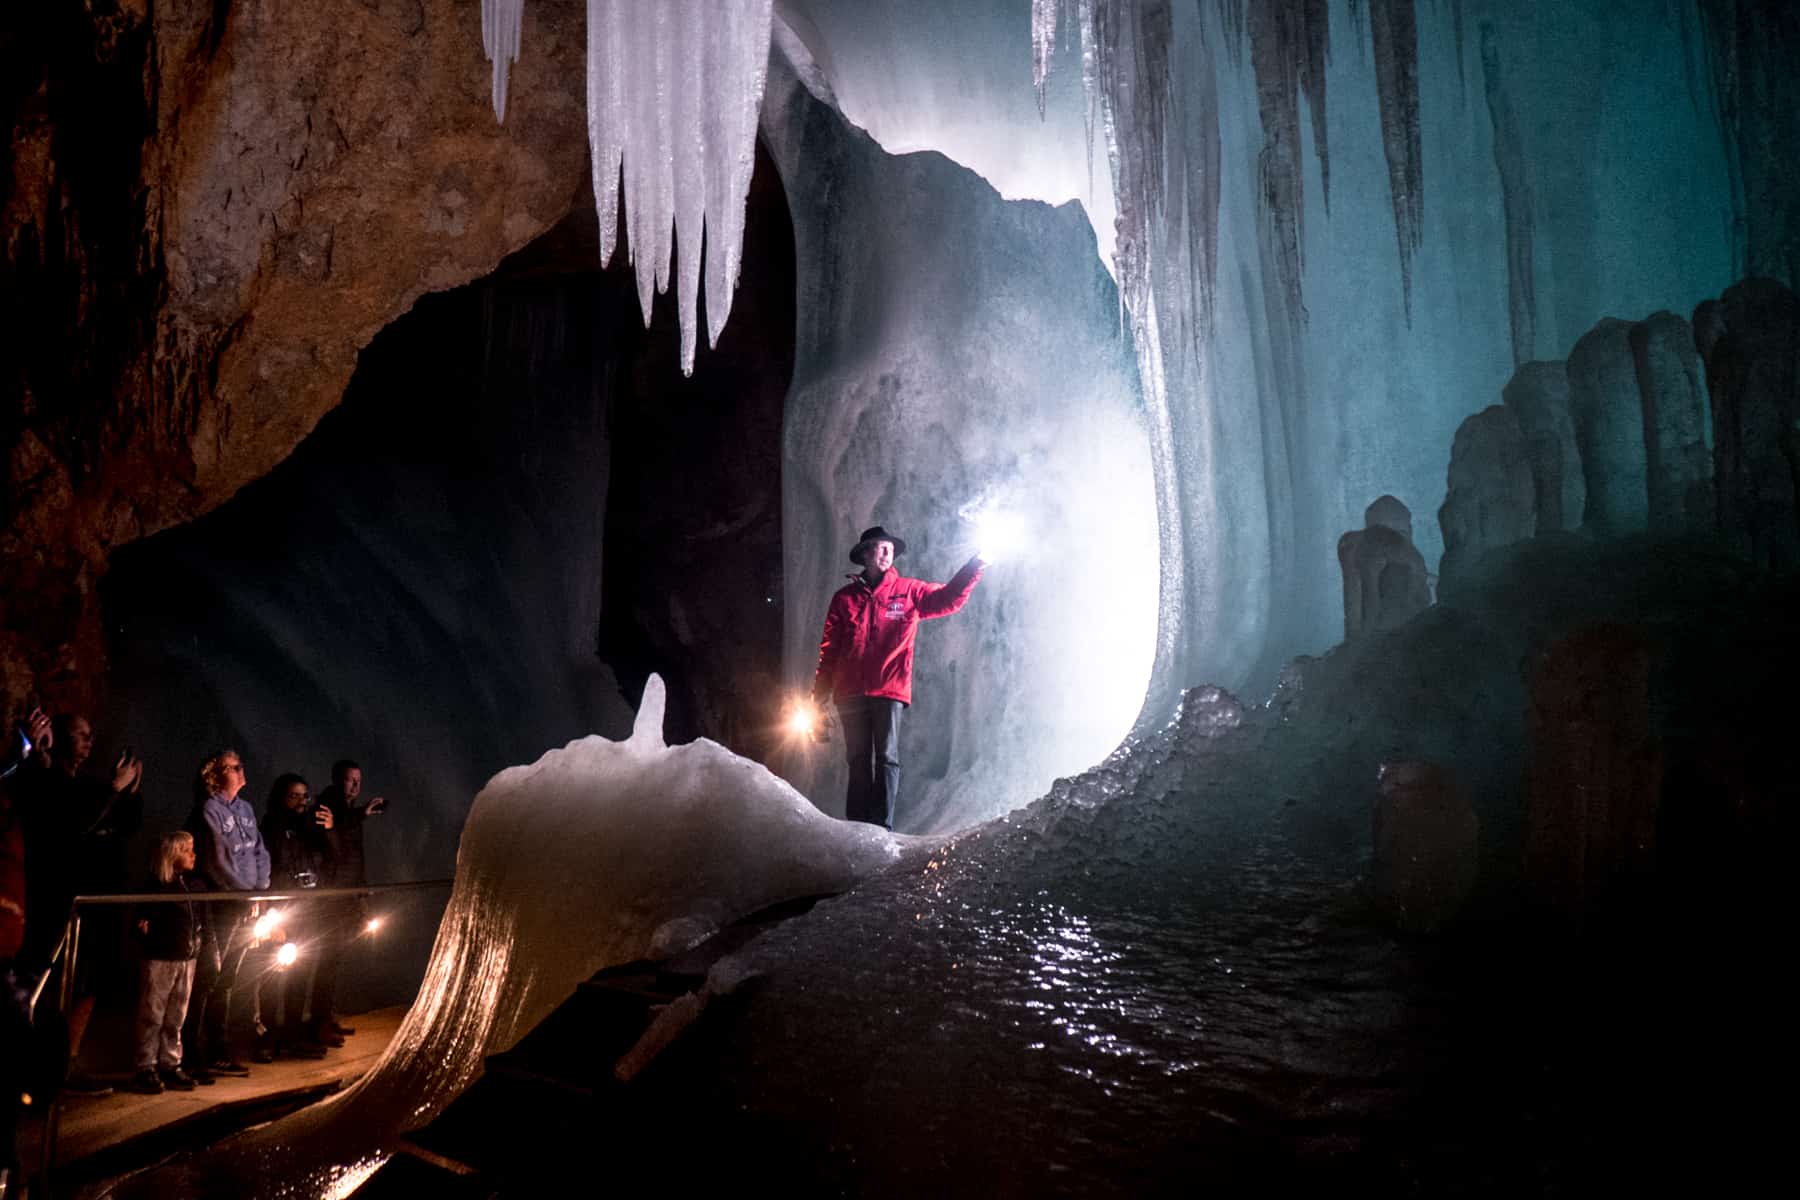 A guide in a red jacket stands in a circle of illuminated ice in the Eisriesenwelt cave. He's holding sparklers. A group looks on in wonder.